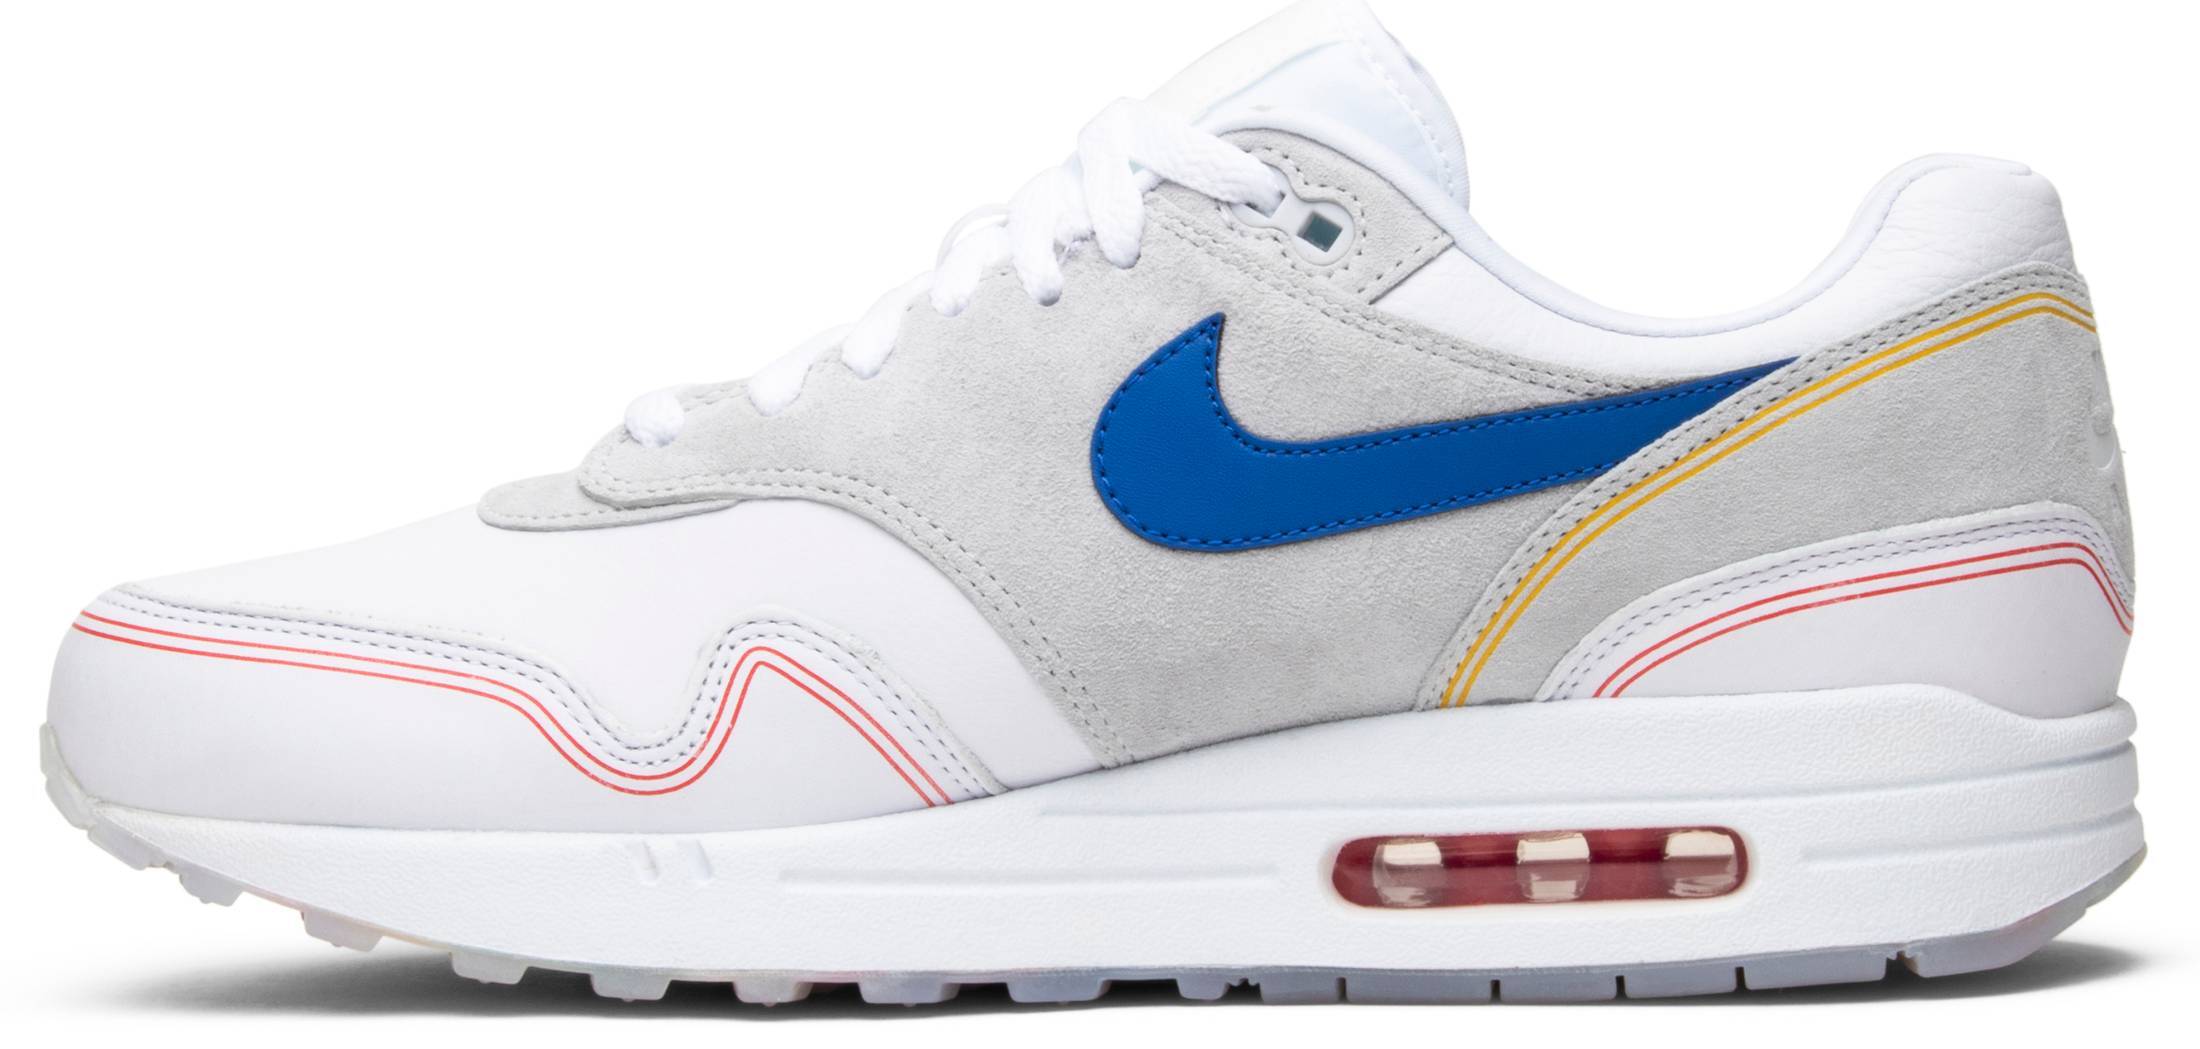 nike air max 1 pompidou by day